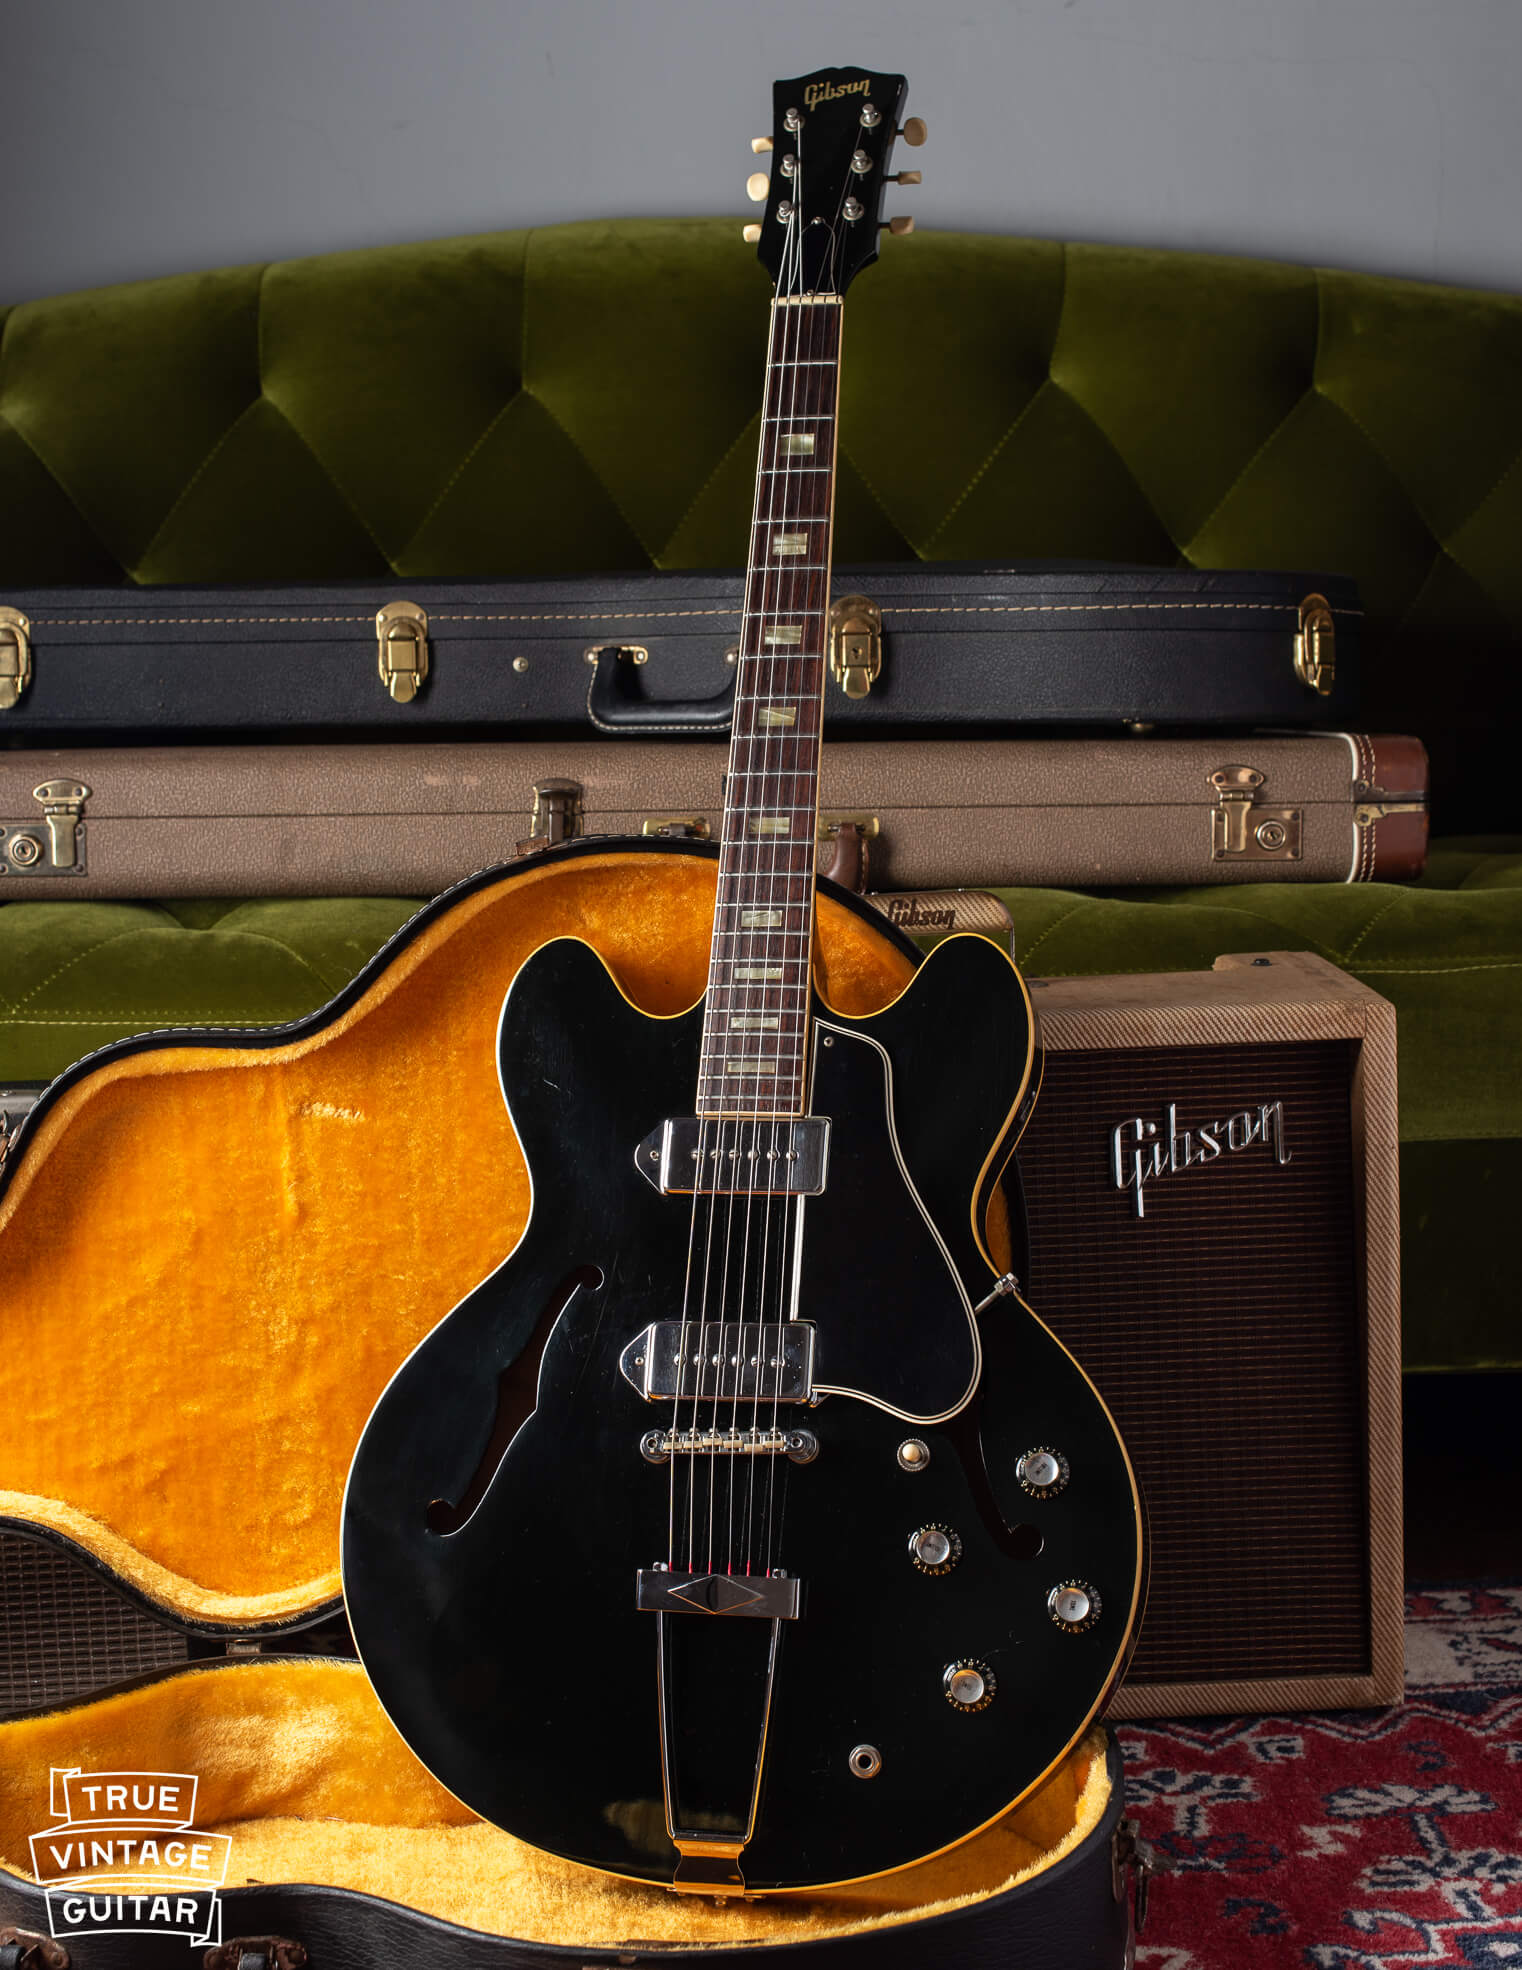 1966 Gibson ES-330 black owned by Matty Healy